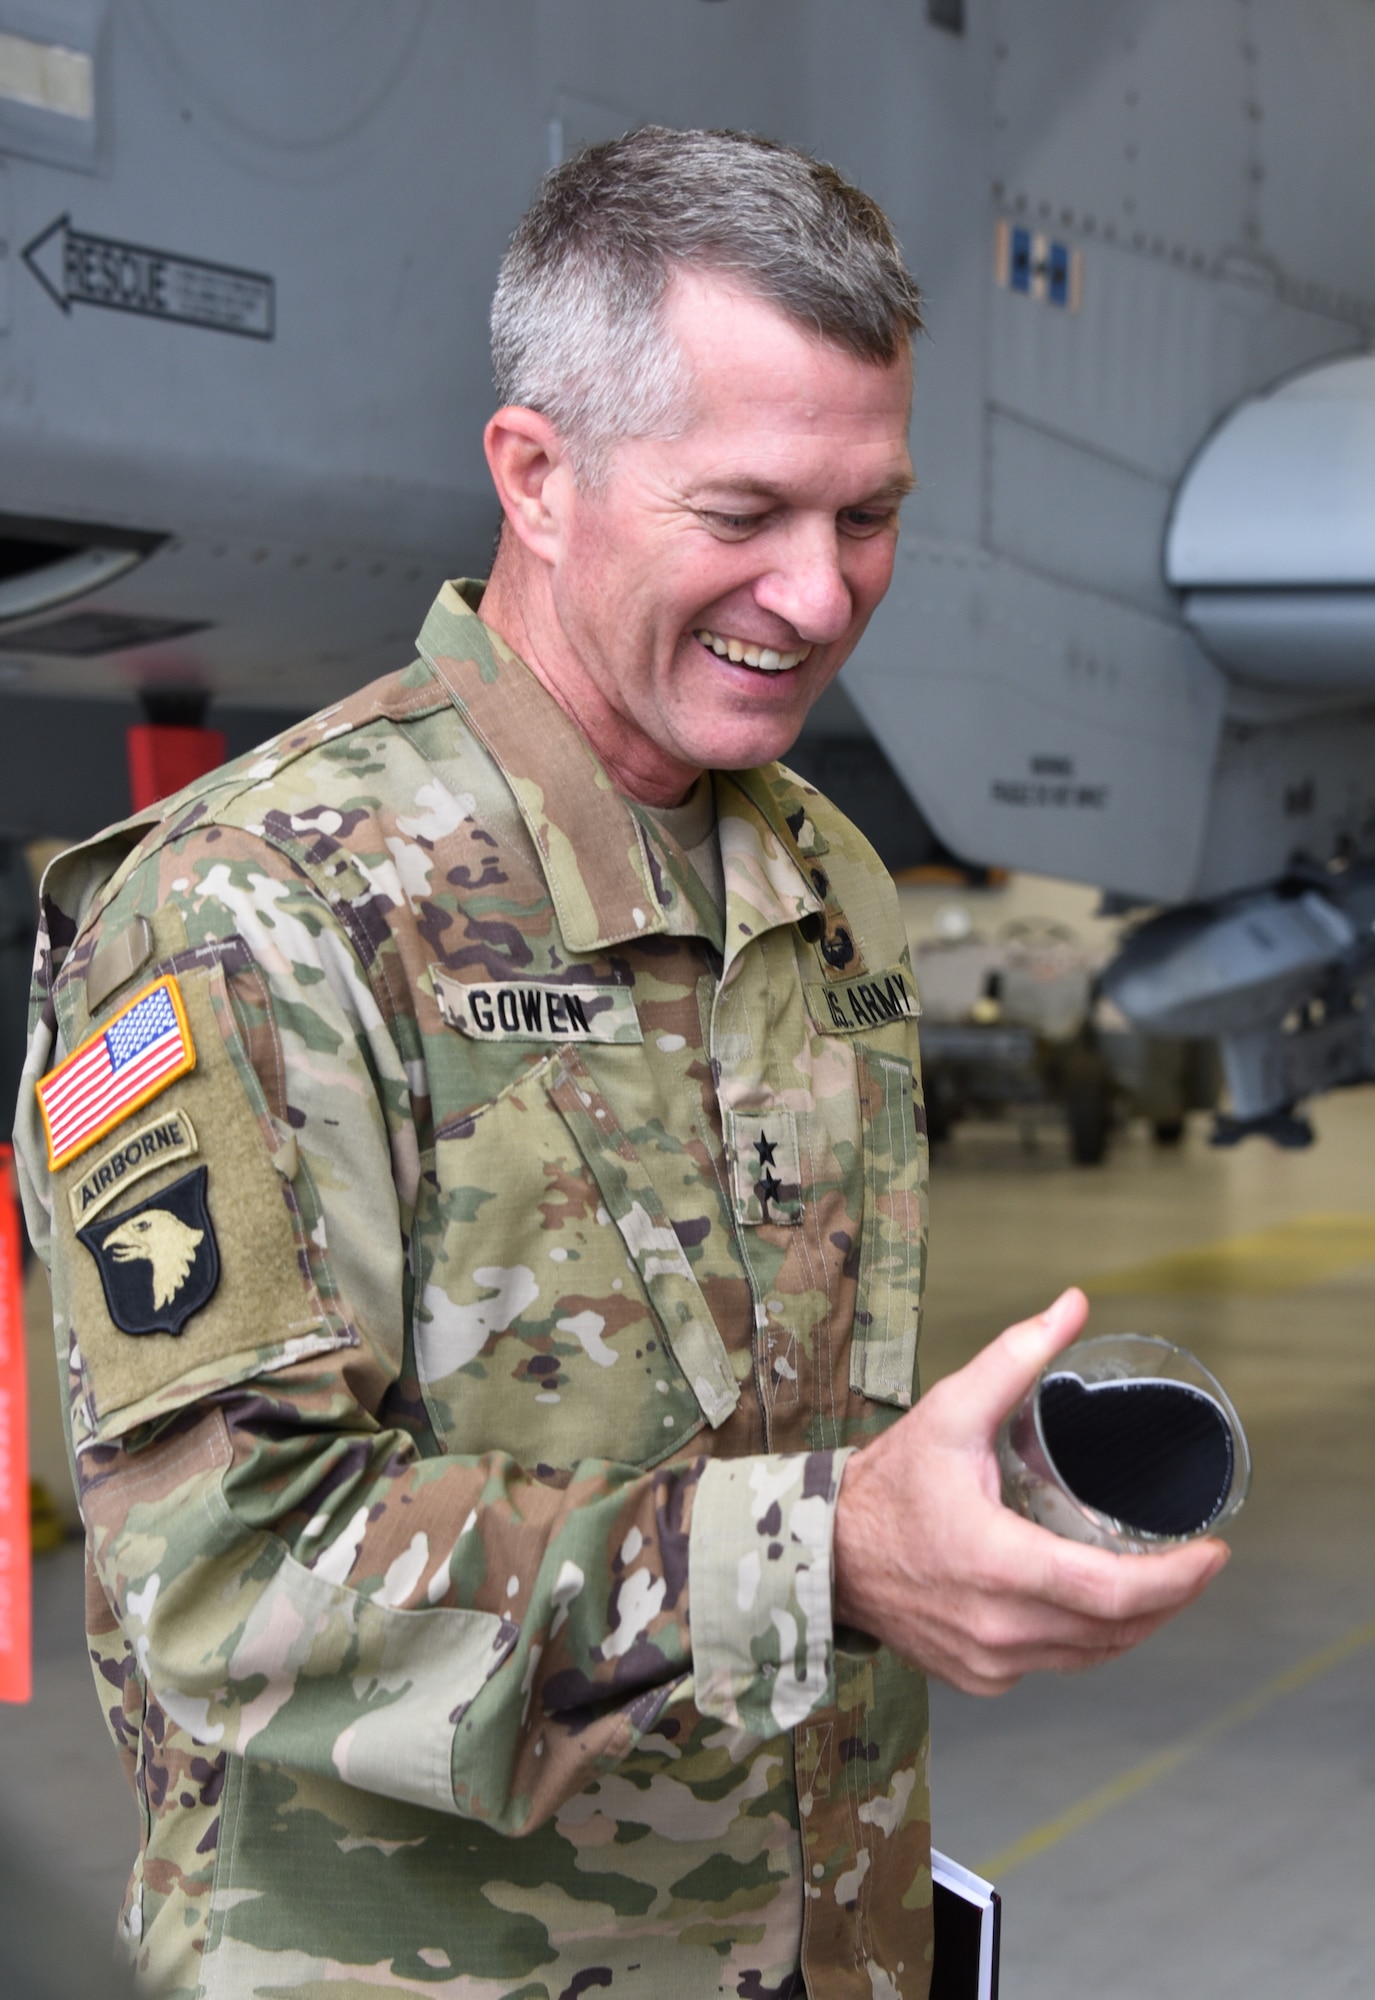 U.S. Army Maj. Gen. Timothy E. Gowen, adjutant general for Maryland, receives a gift from senior leaders from the 175th Wing, Maryland Air National Guard Oct. 6, 2019 during his initial visit to the base in Middle River, Md.